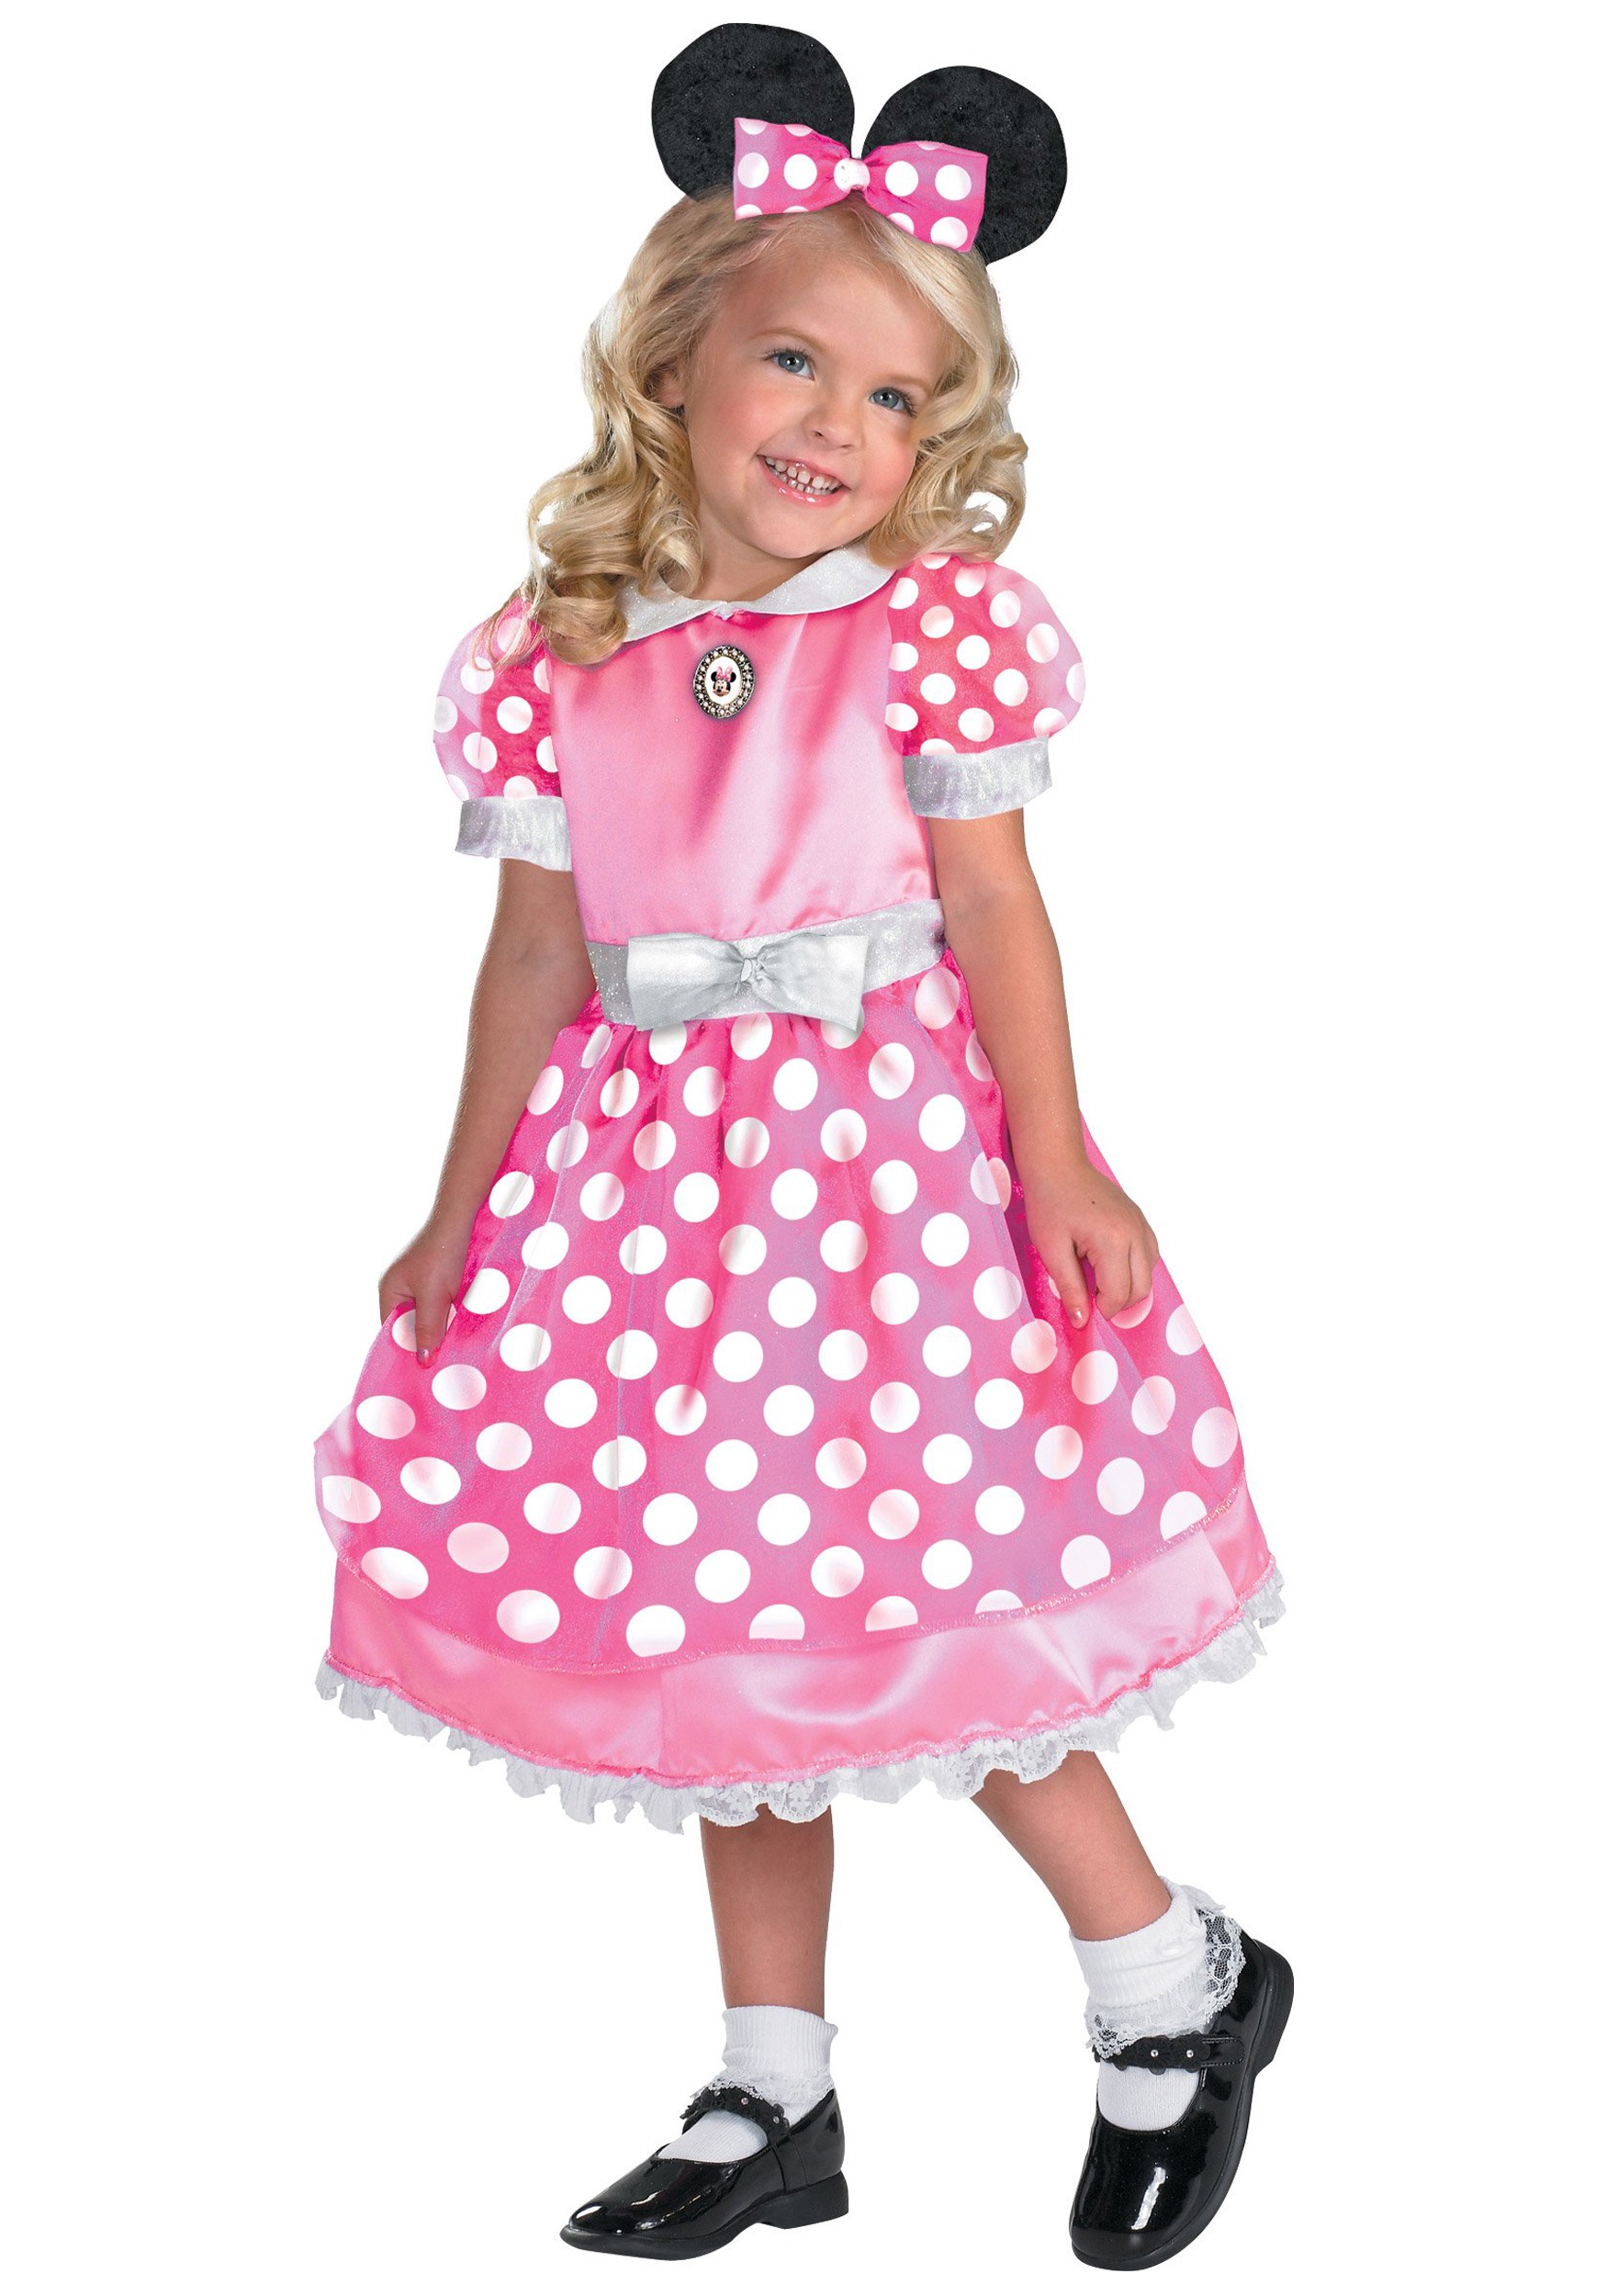 Photos - Fancy Dress Toddler Disguise Pink Polka-Dot Minnie Mouse Girl's Costume | Disney Character Cos 